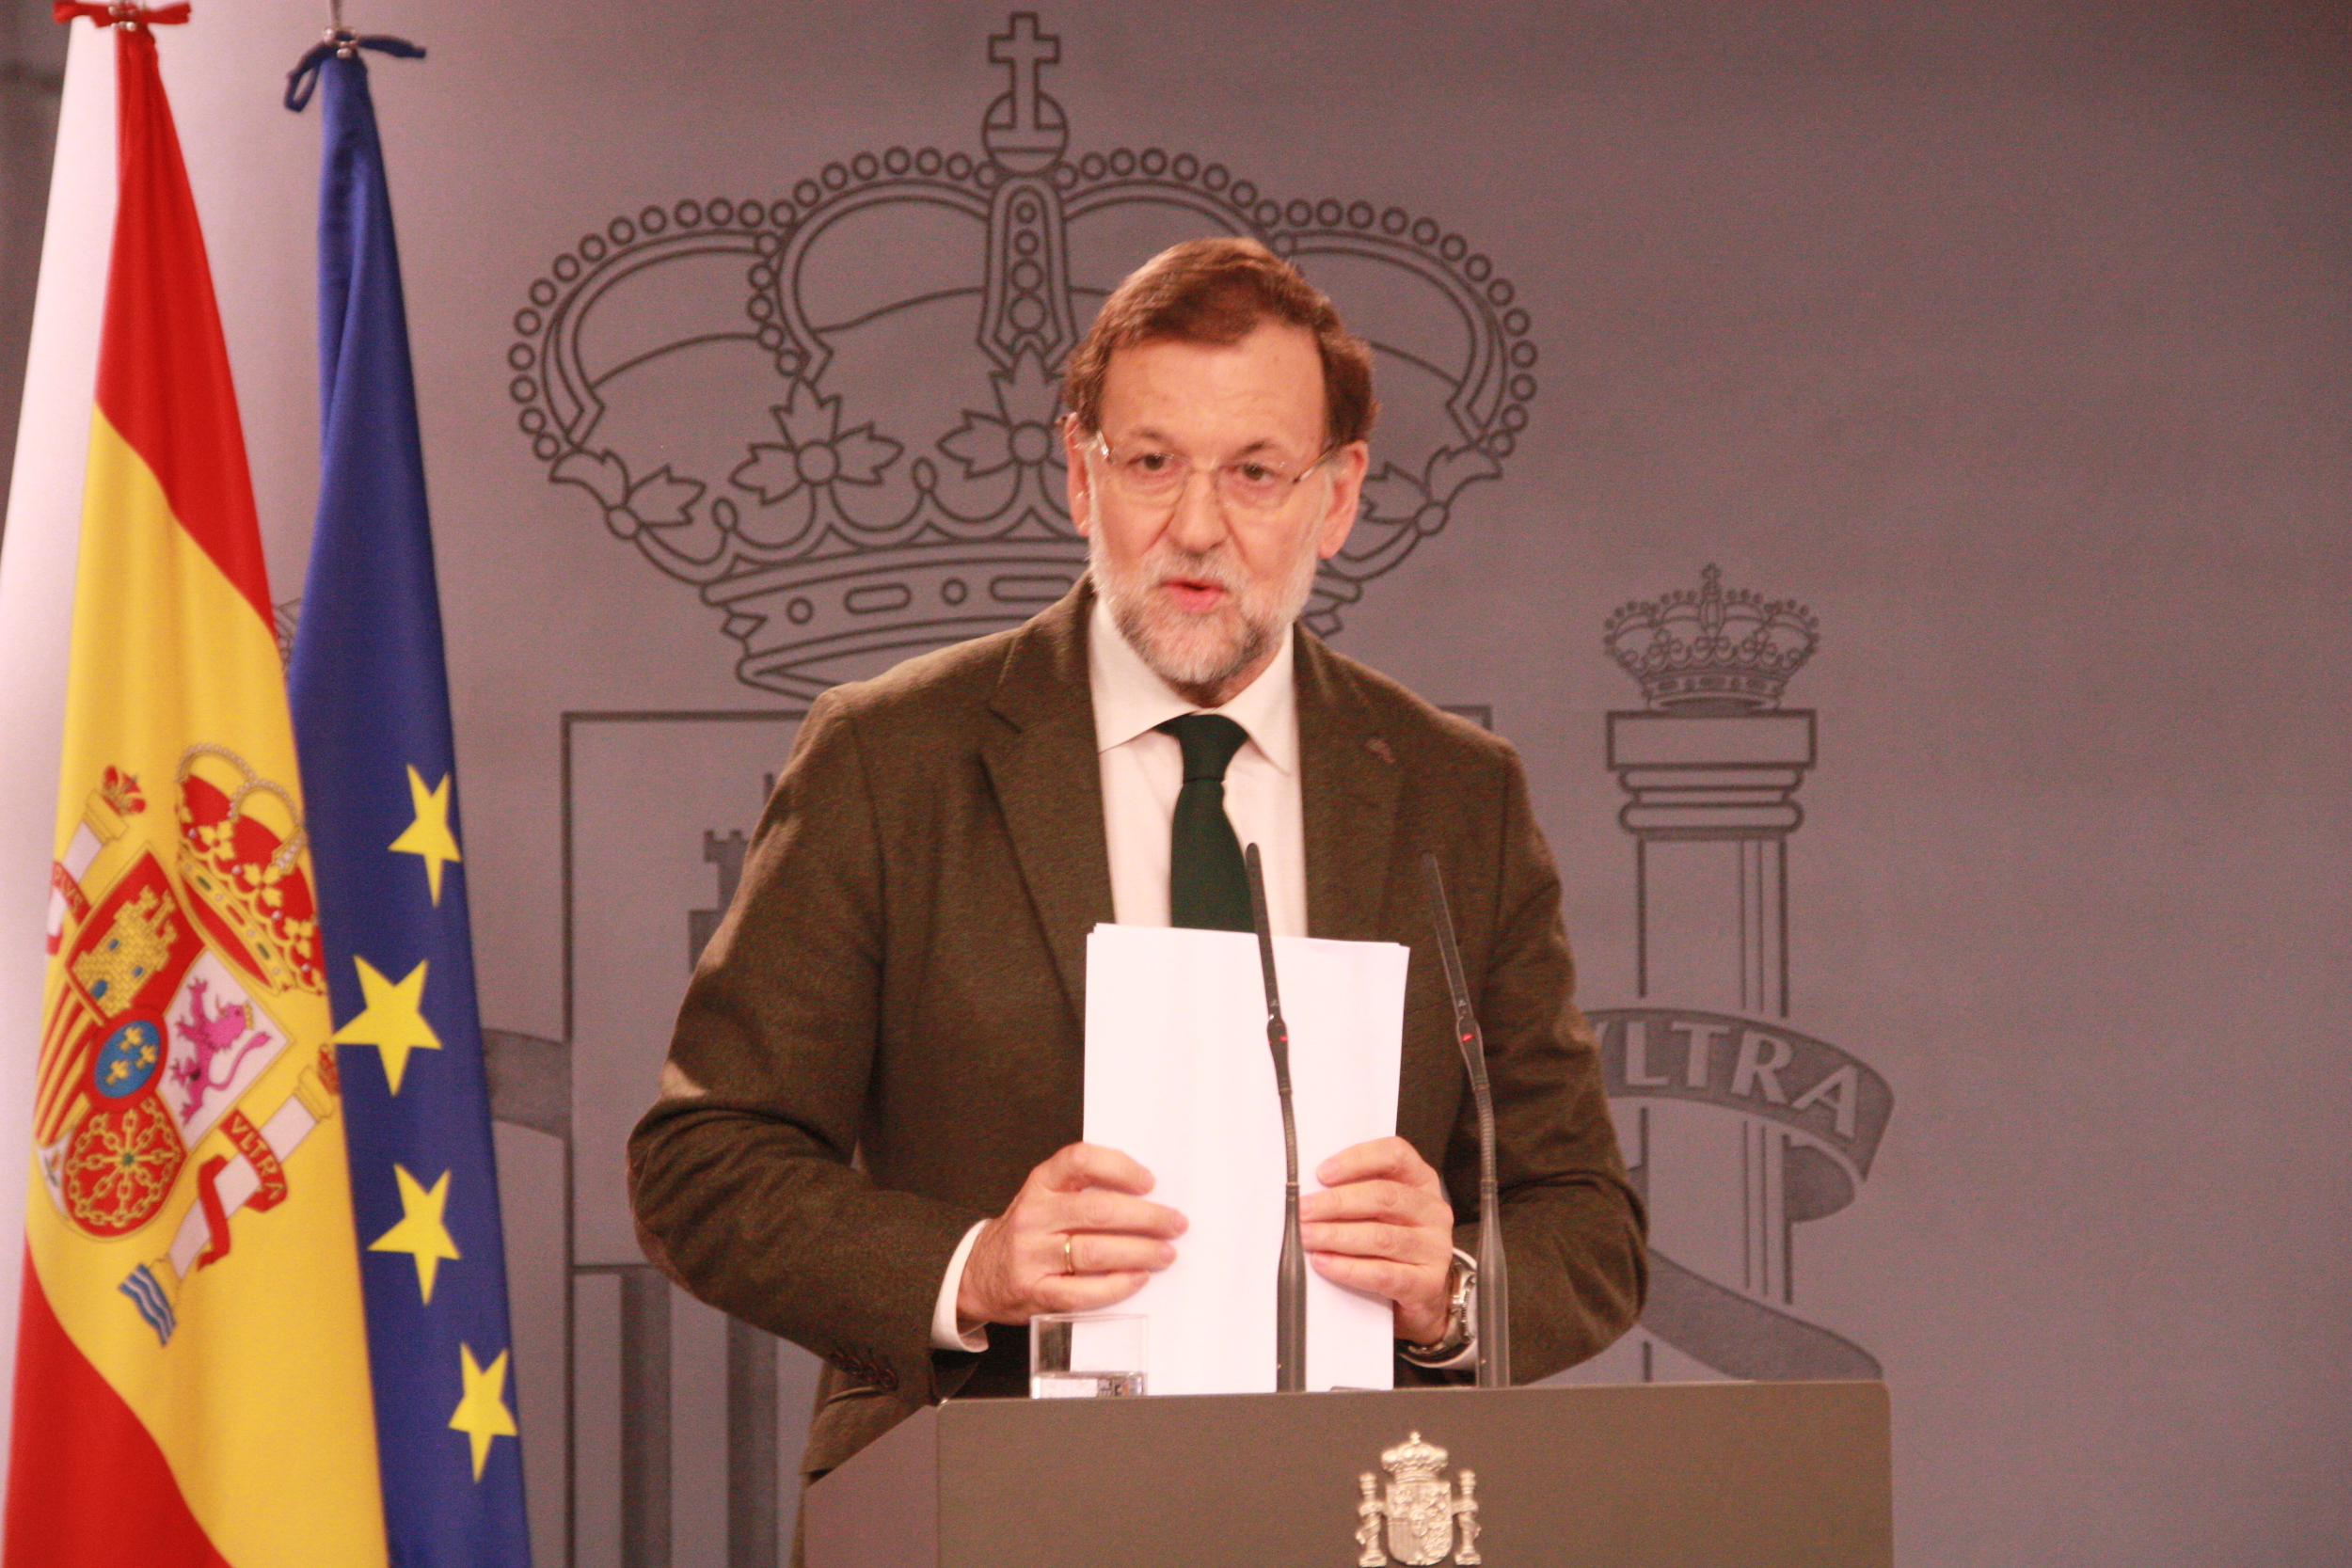 Spanish Prime Minister, Mariano Rajoy, appeared before the media after the meetings